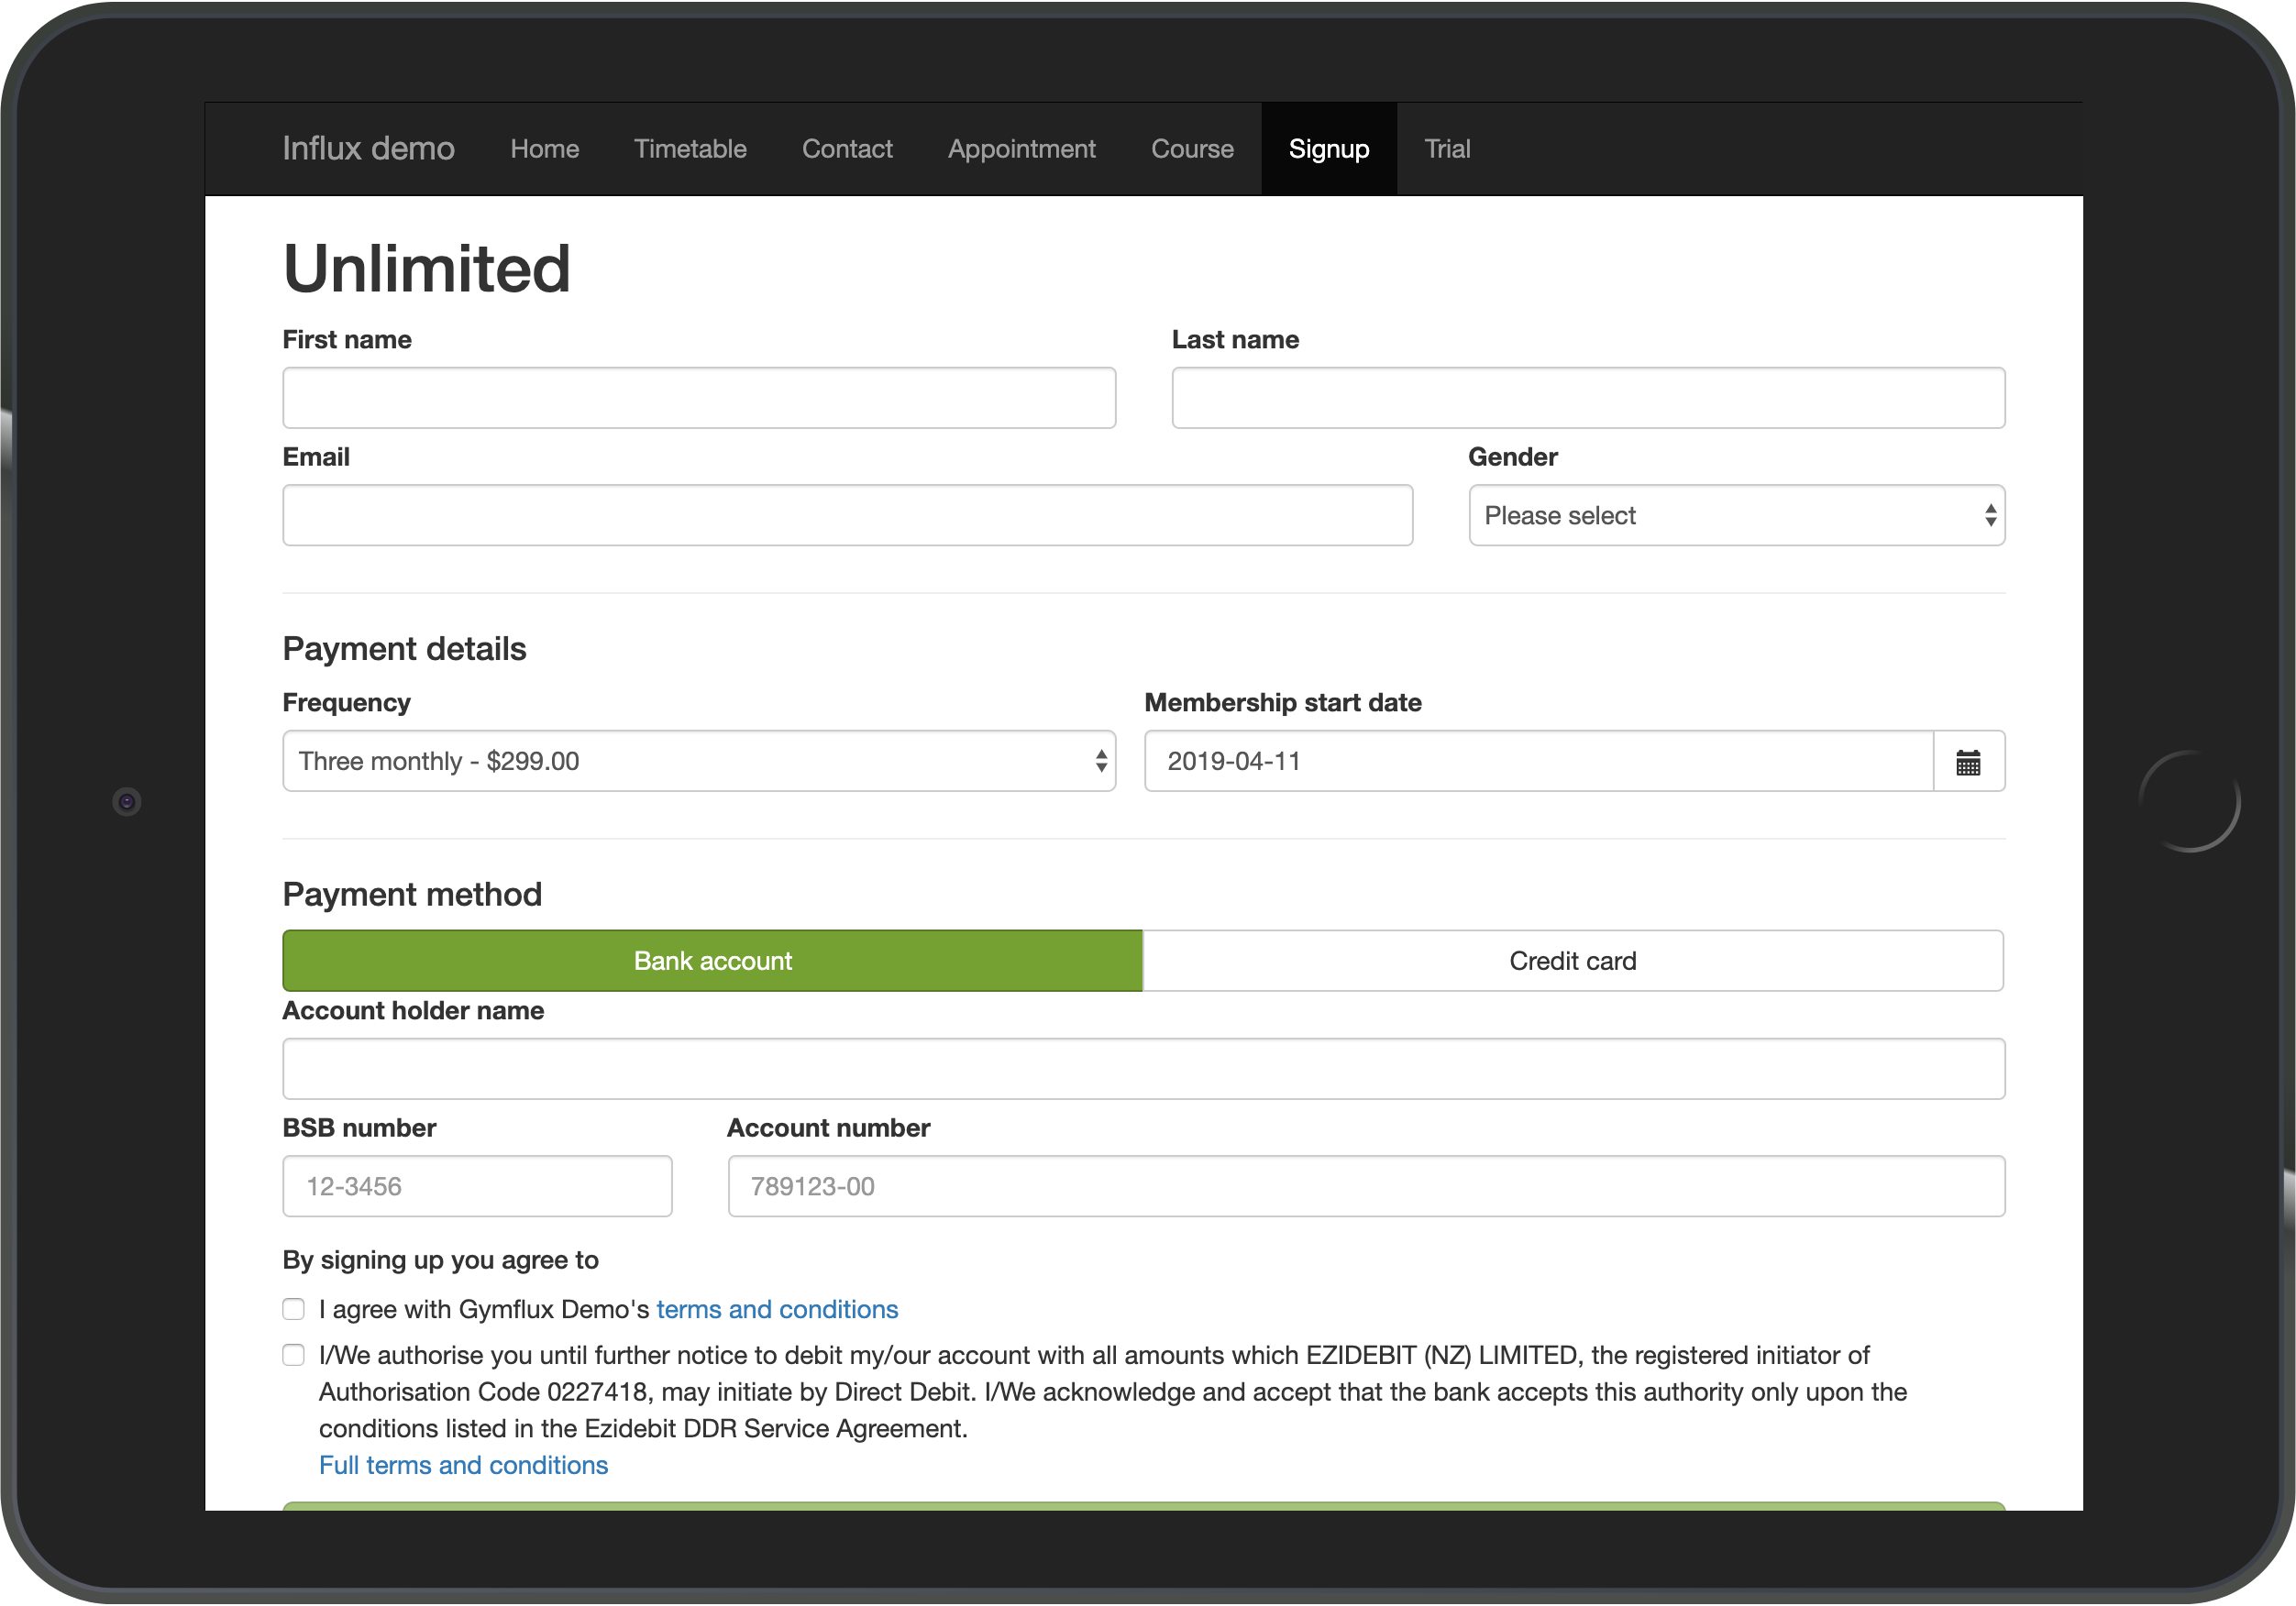 Embed Influx's online signup functionality into your website